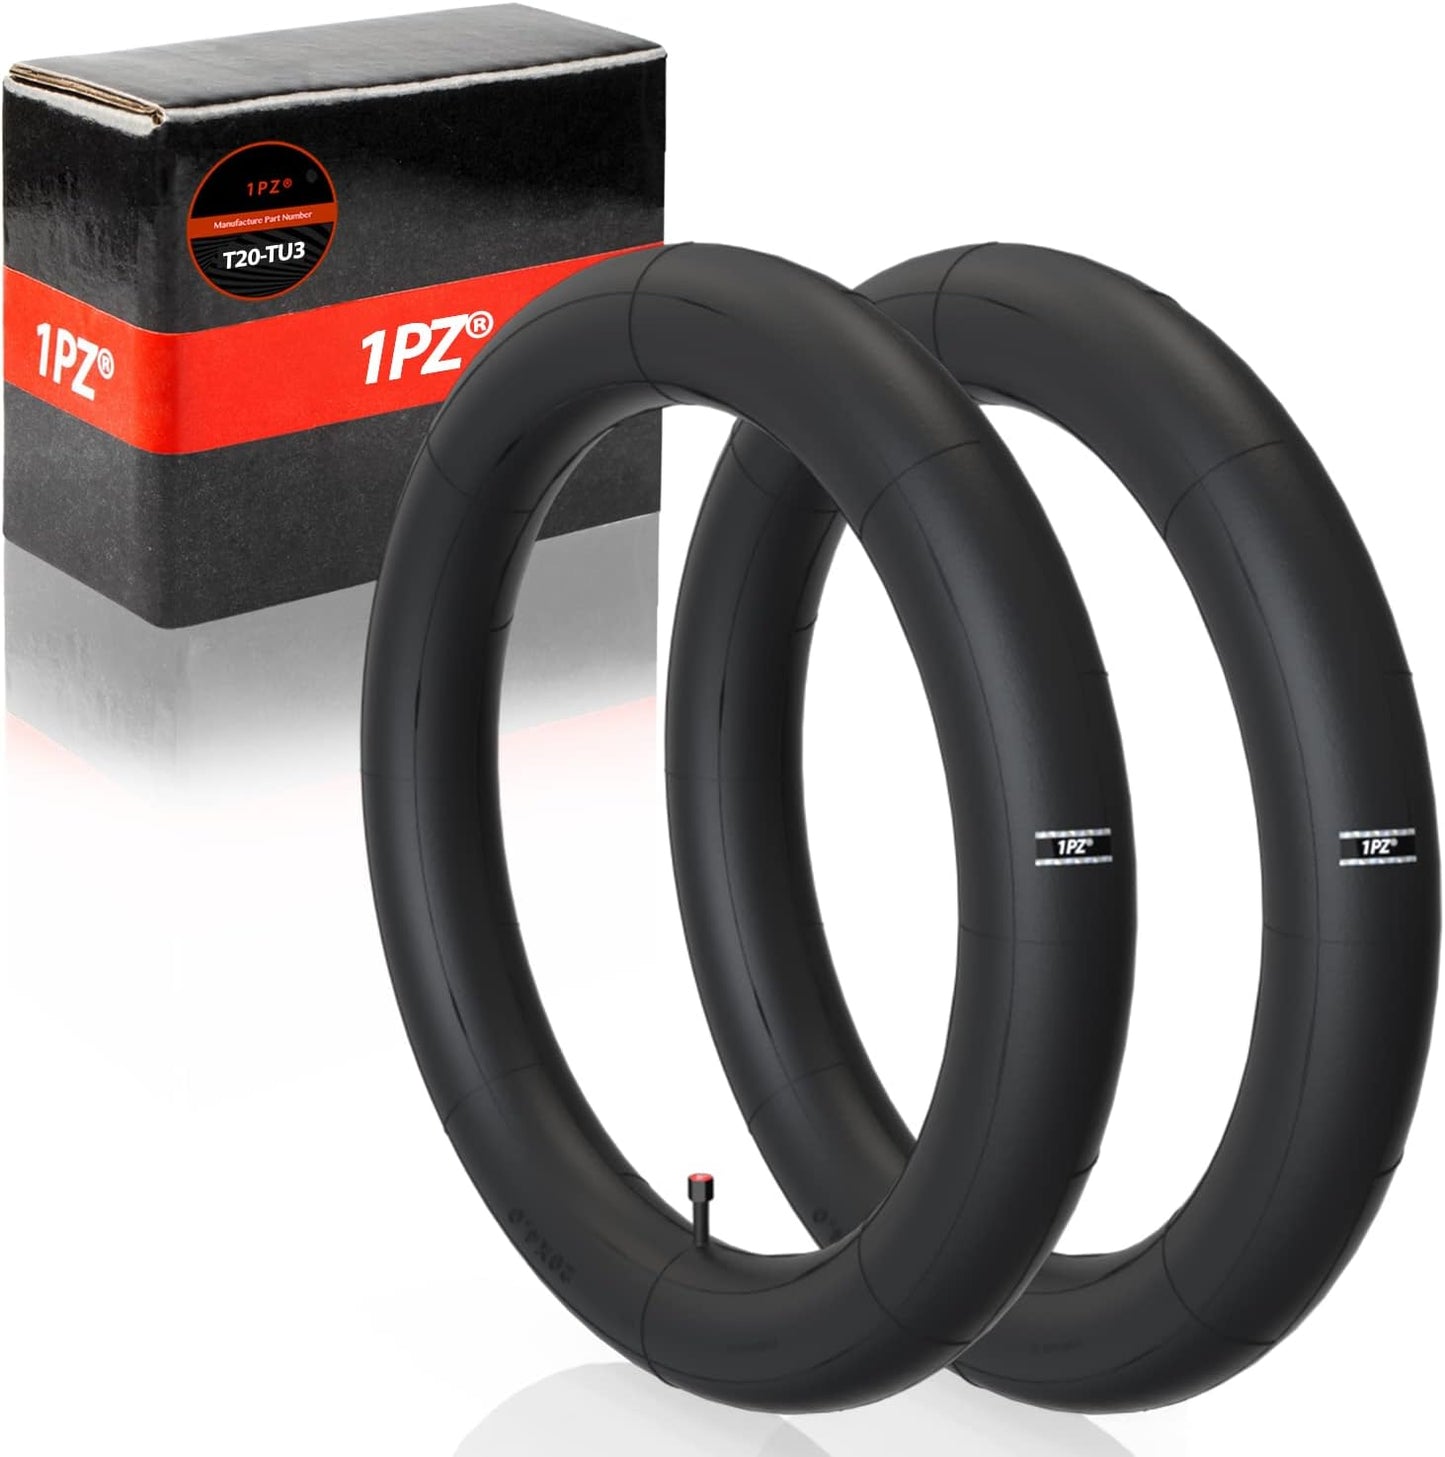 1PZ FT3-X01 2-Pack Fat Tire Tubes 20 x 4.0 SV32mm Schrader Valve Mountain Bike E-Bike Bicycle Tire Tubes Compatible with 20x4.0 20x4.10 20x4.20 20x4.25 20x4.30 20x4.35 20x4.40 20x4.50